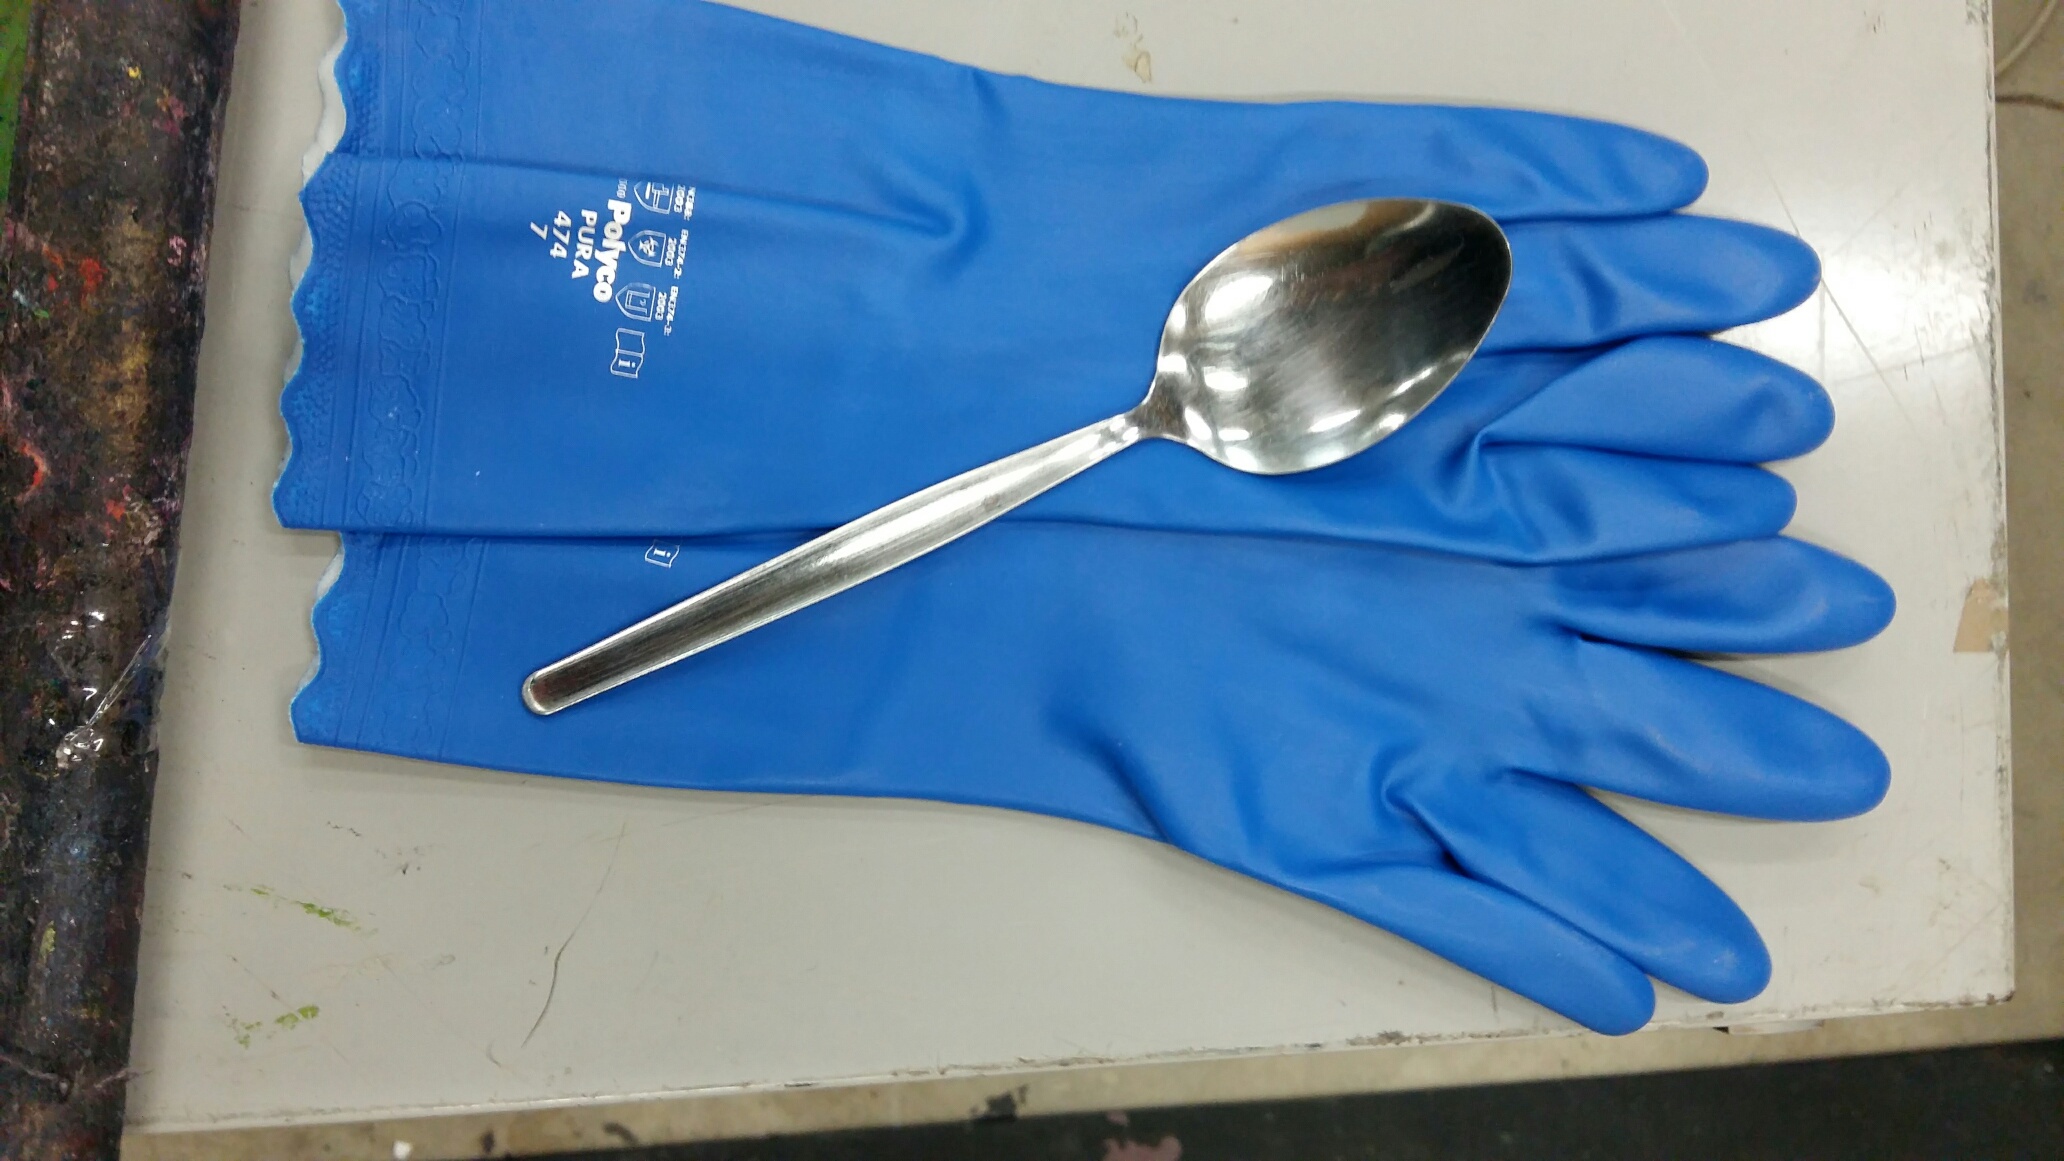 Spoon and Glove Set